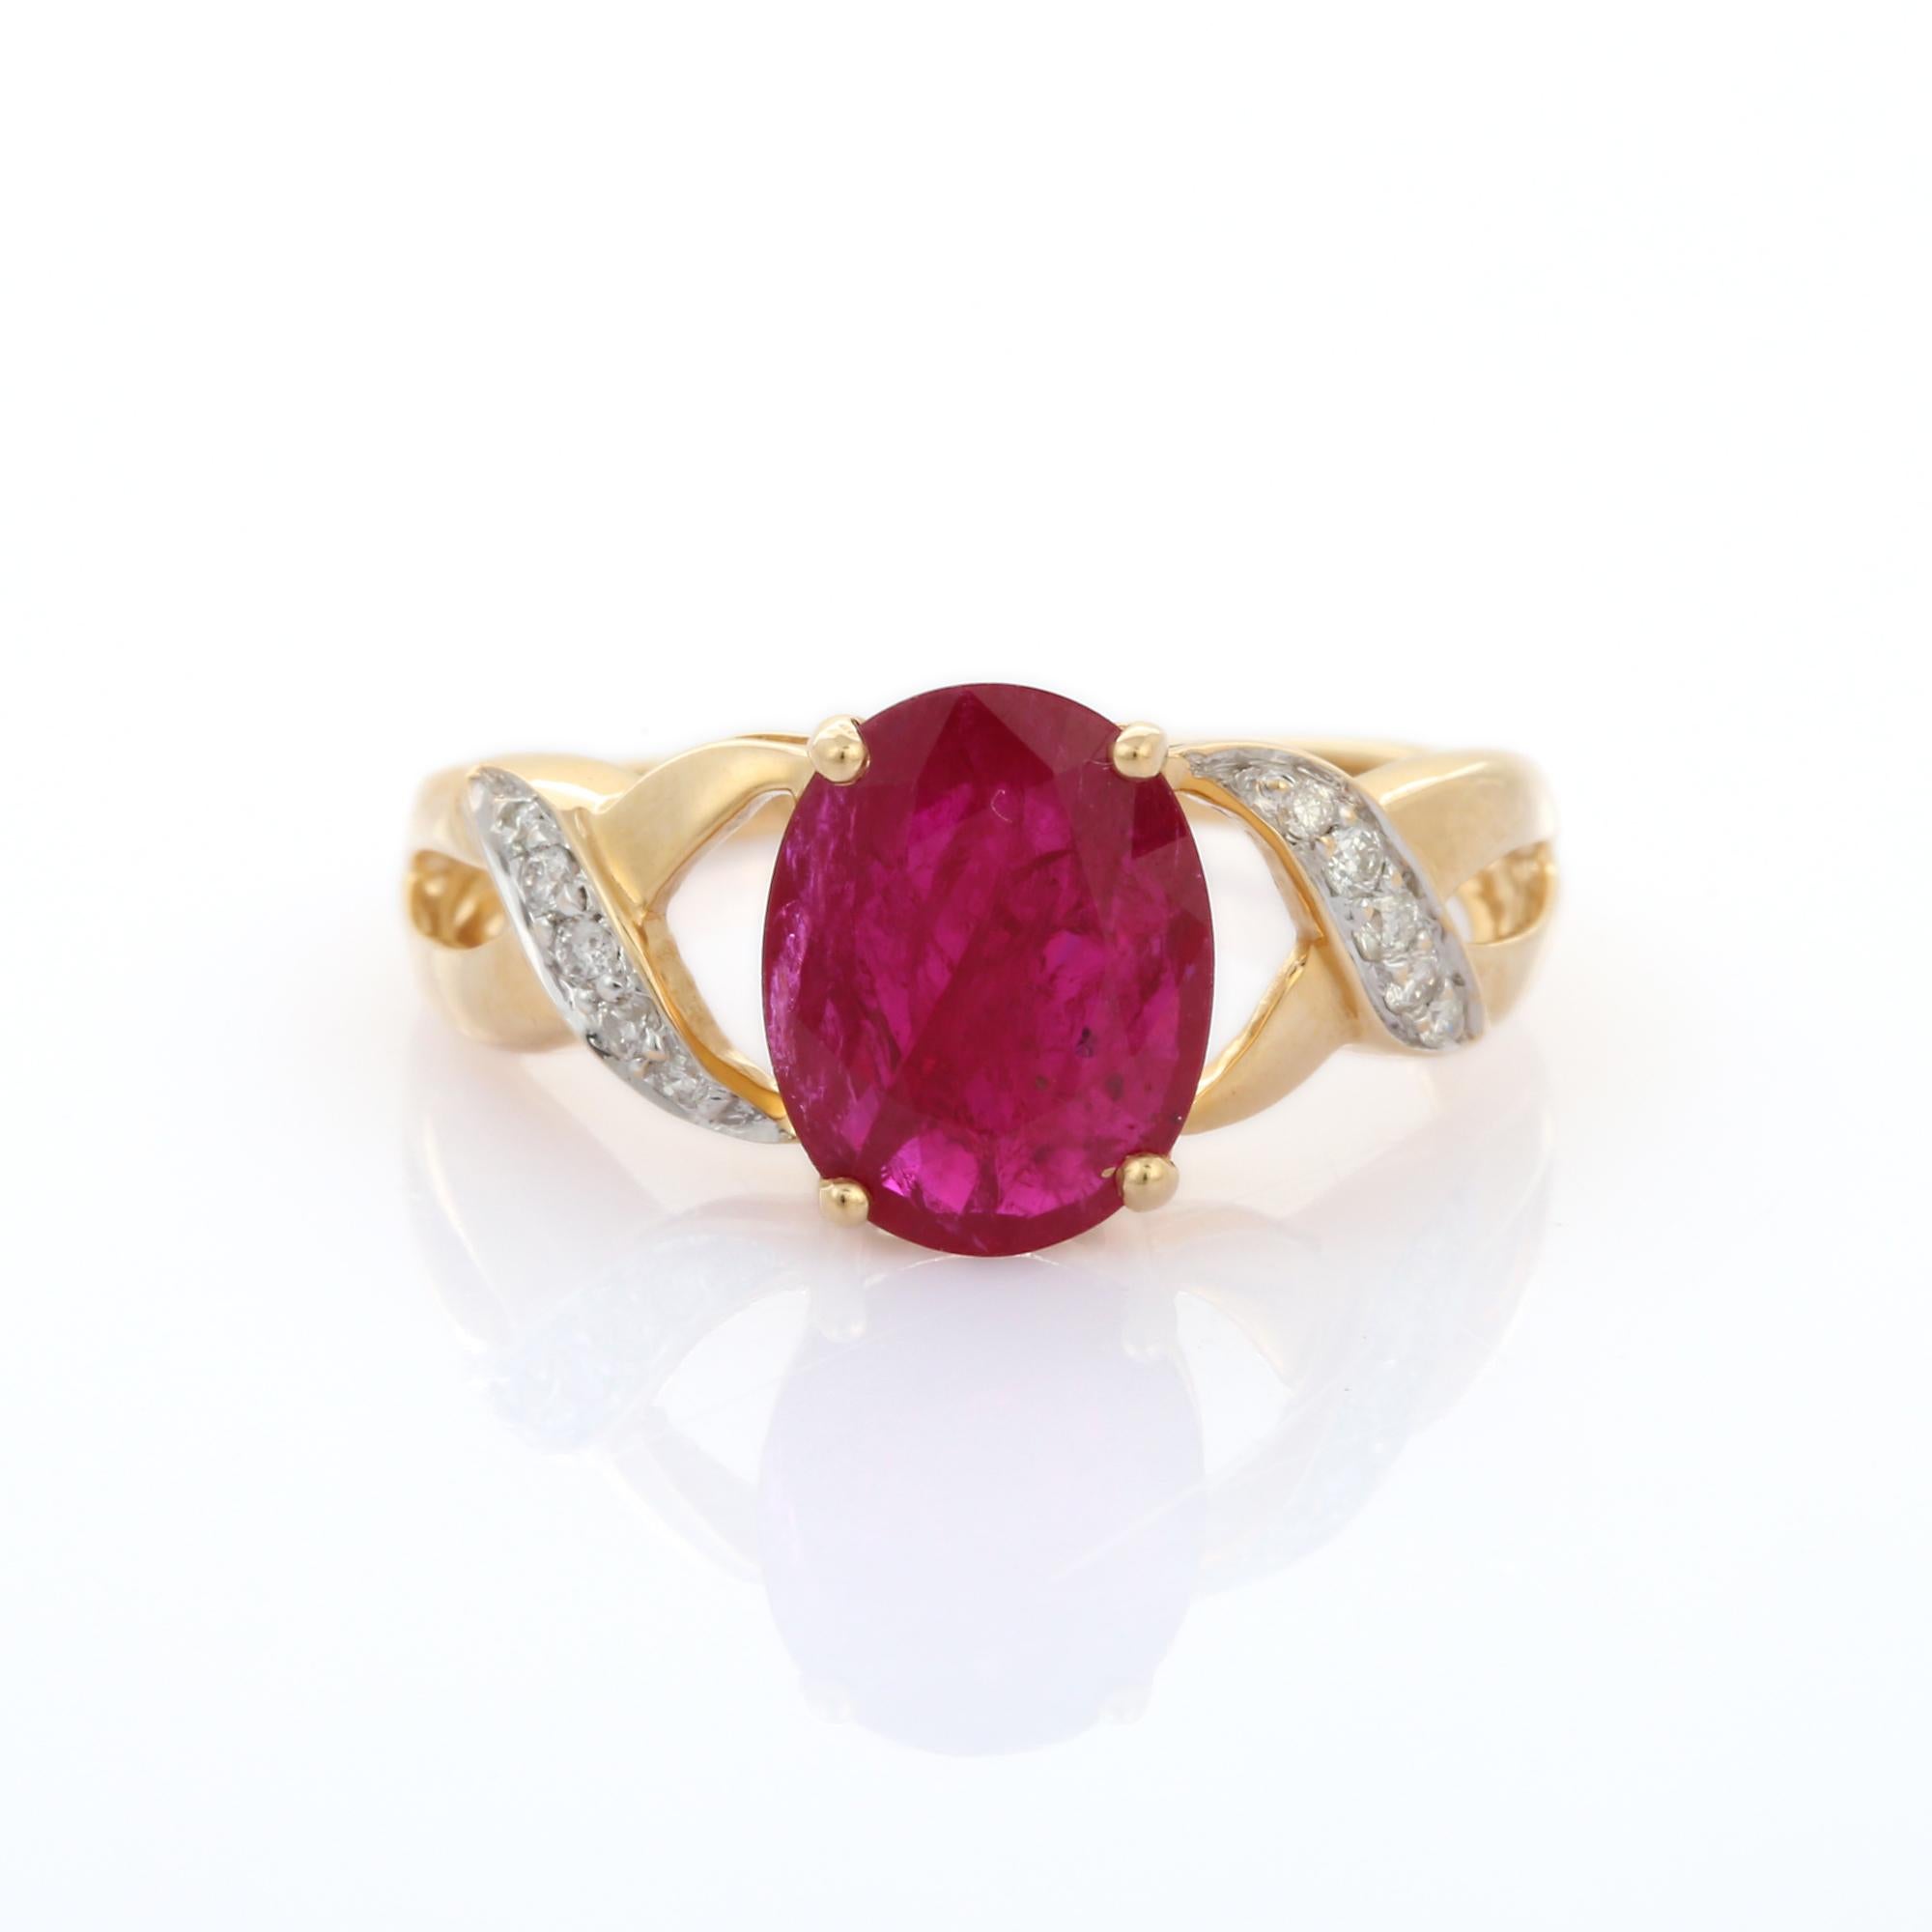 For Sale:  2.28 Carat Ruby Side Wave Diamond Engagement Ring in 18K Yellow Gold 8